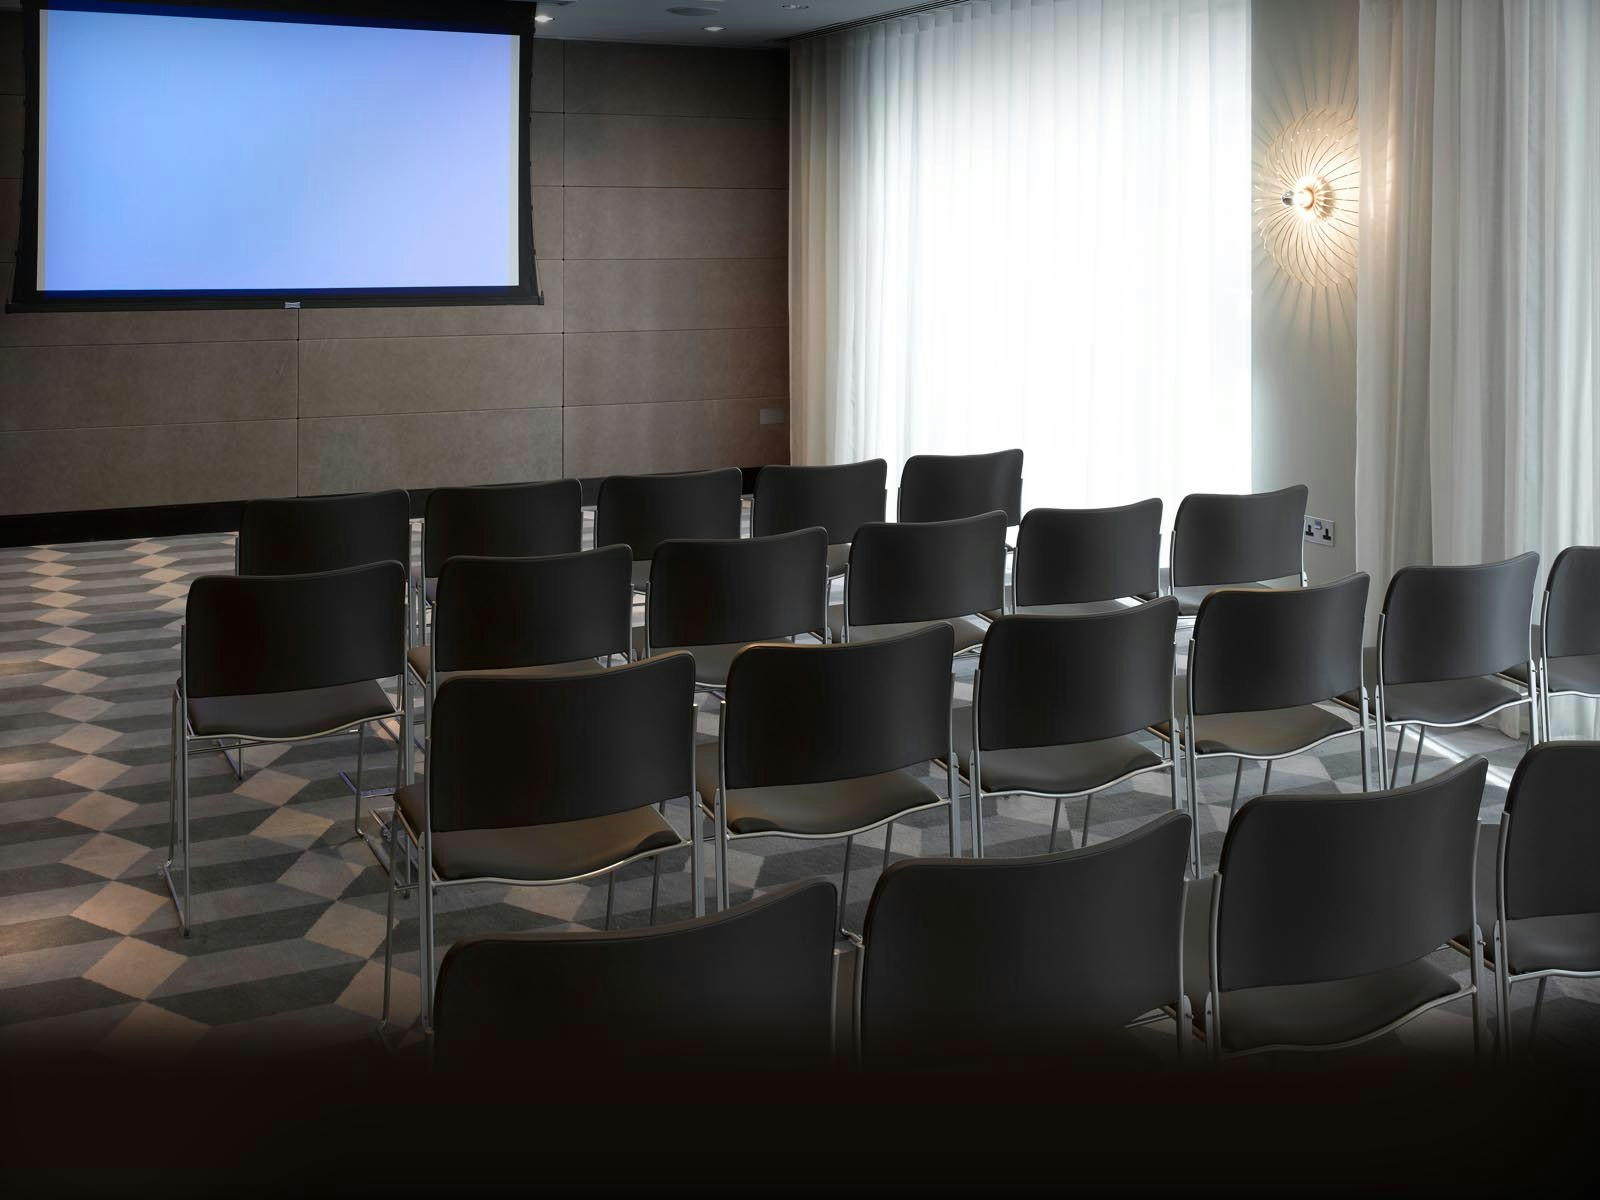 Hotel Conferences Venues in London - South Place Hotel